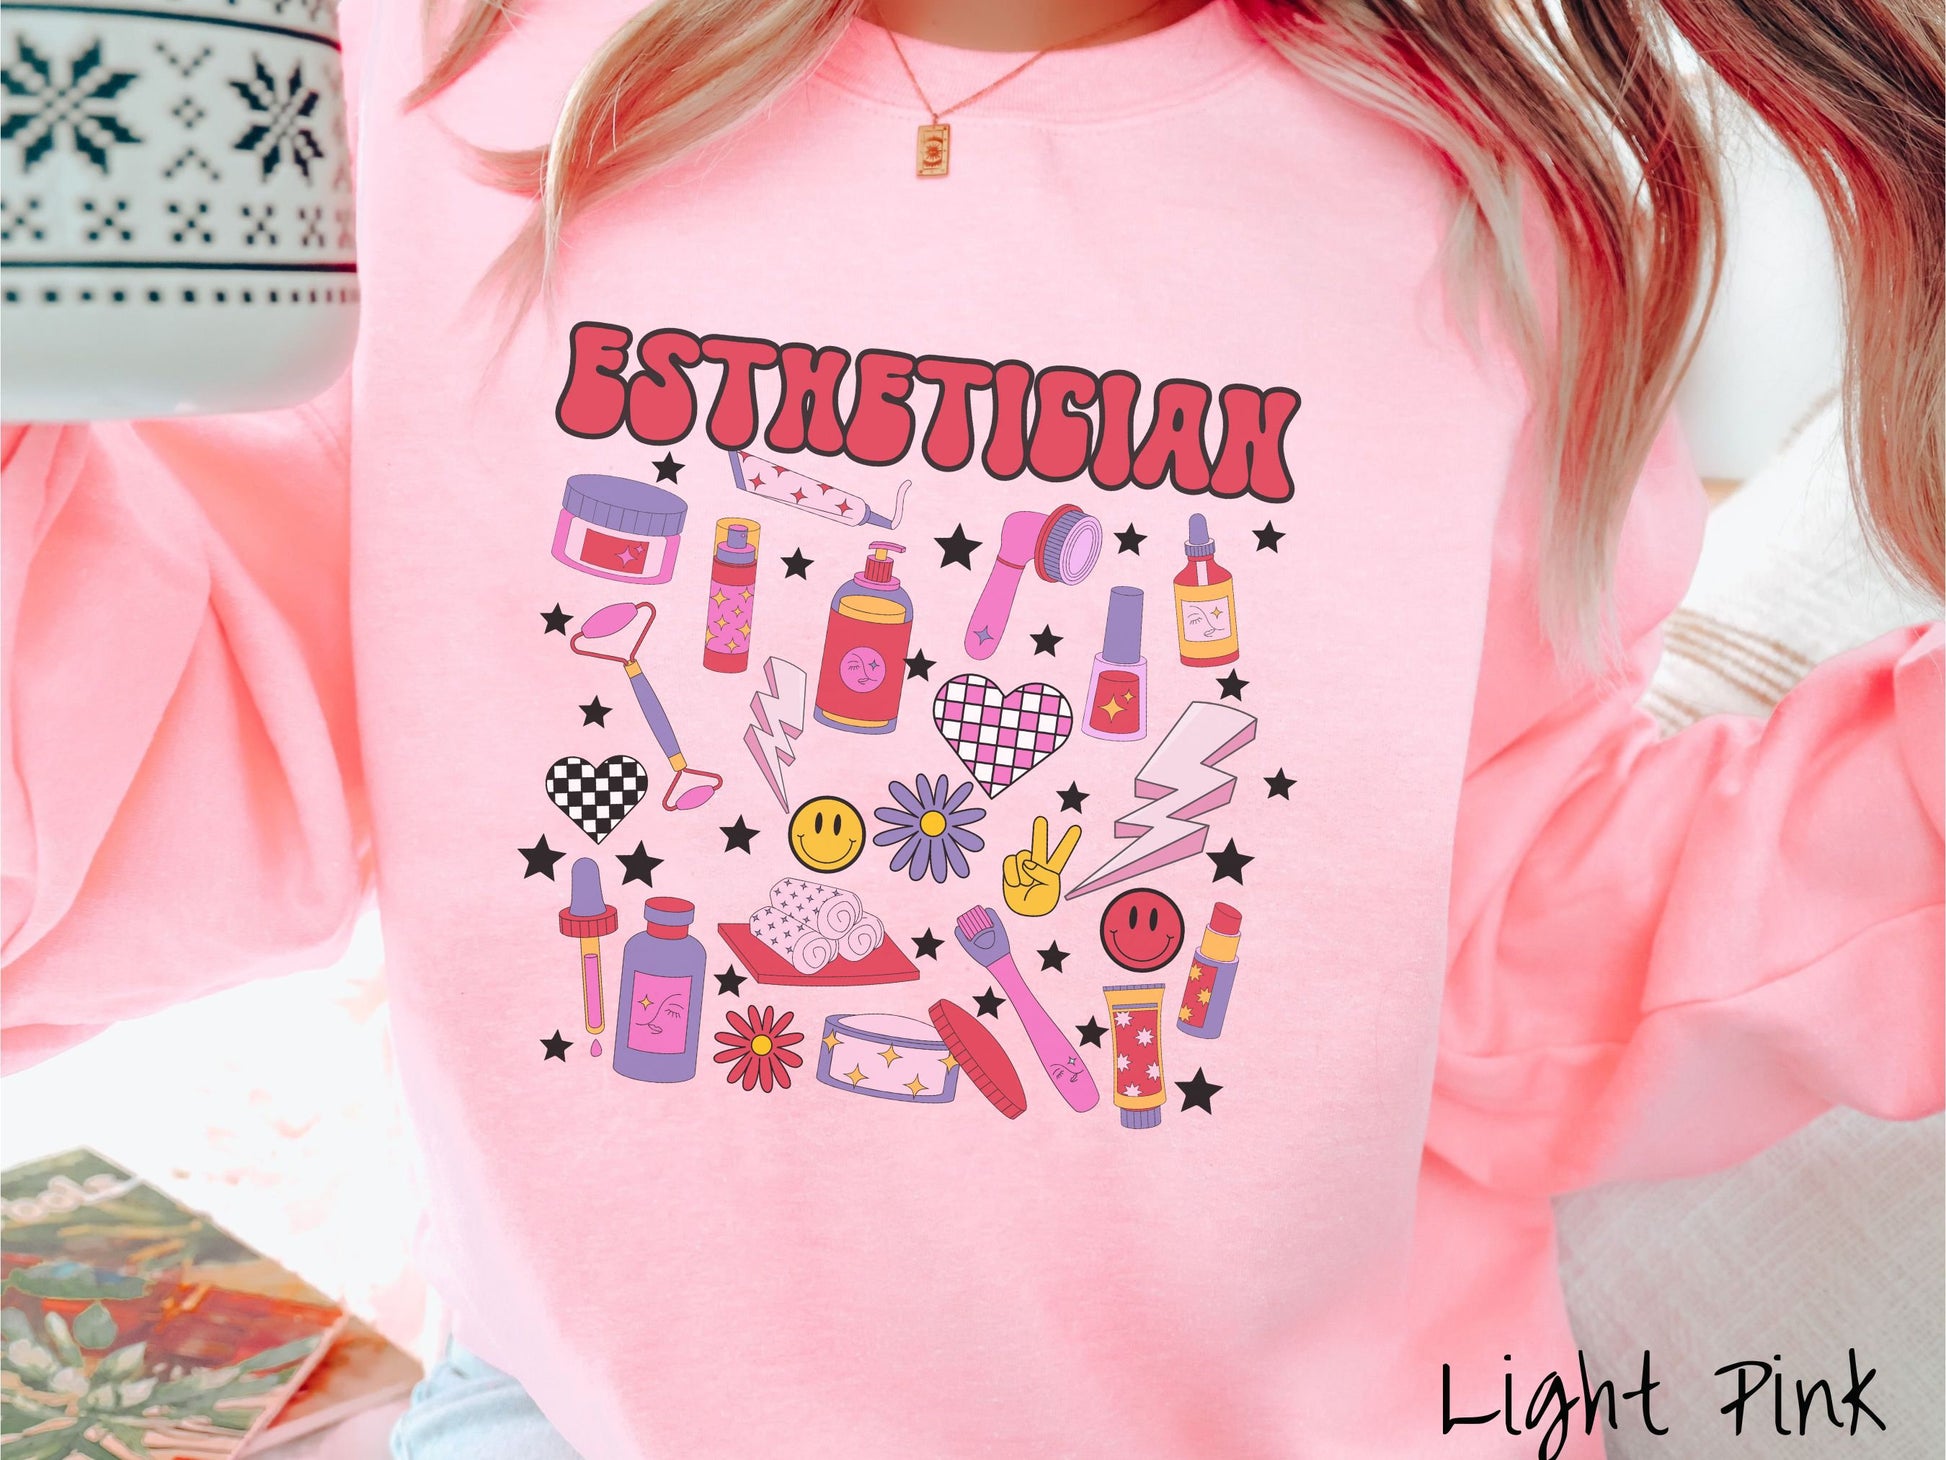 A woman wearing a cute light pink colored sweatshirt with the word Esthetician across the top and hair care items below like cream, rollers, hair care products, and droppers. Smiley faces, stars, and lightning bolts are spread out among the items.